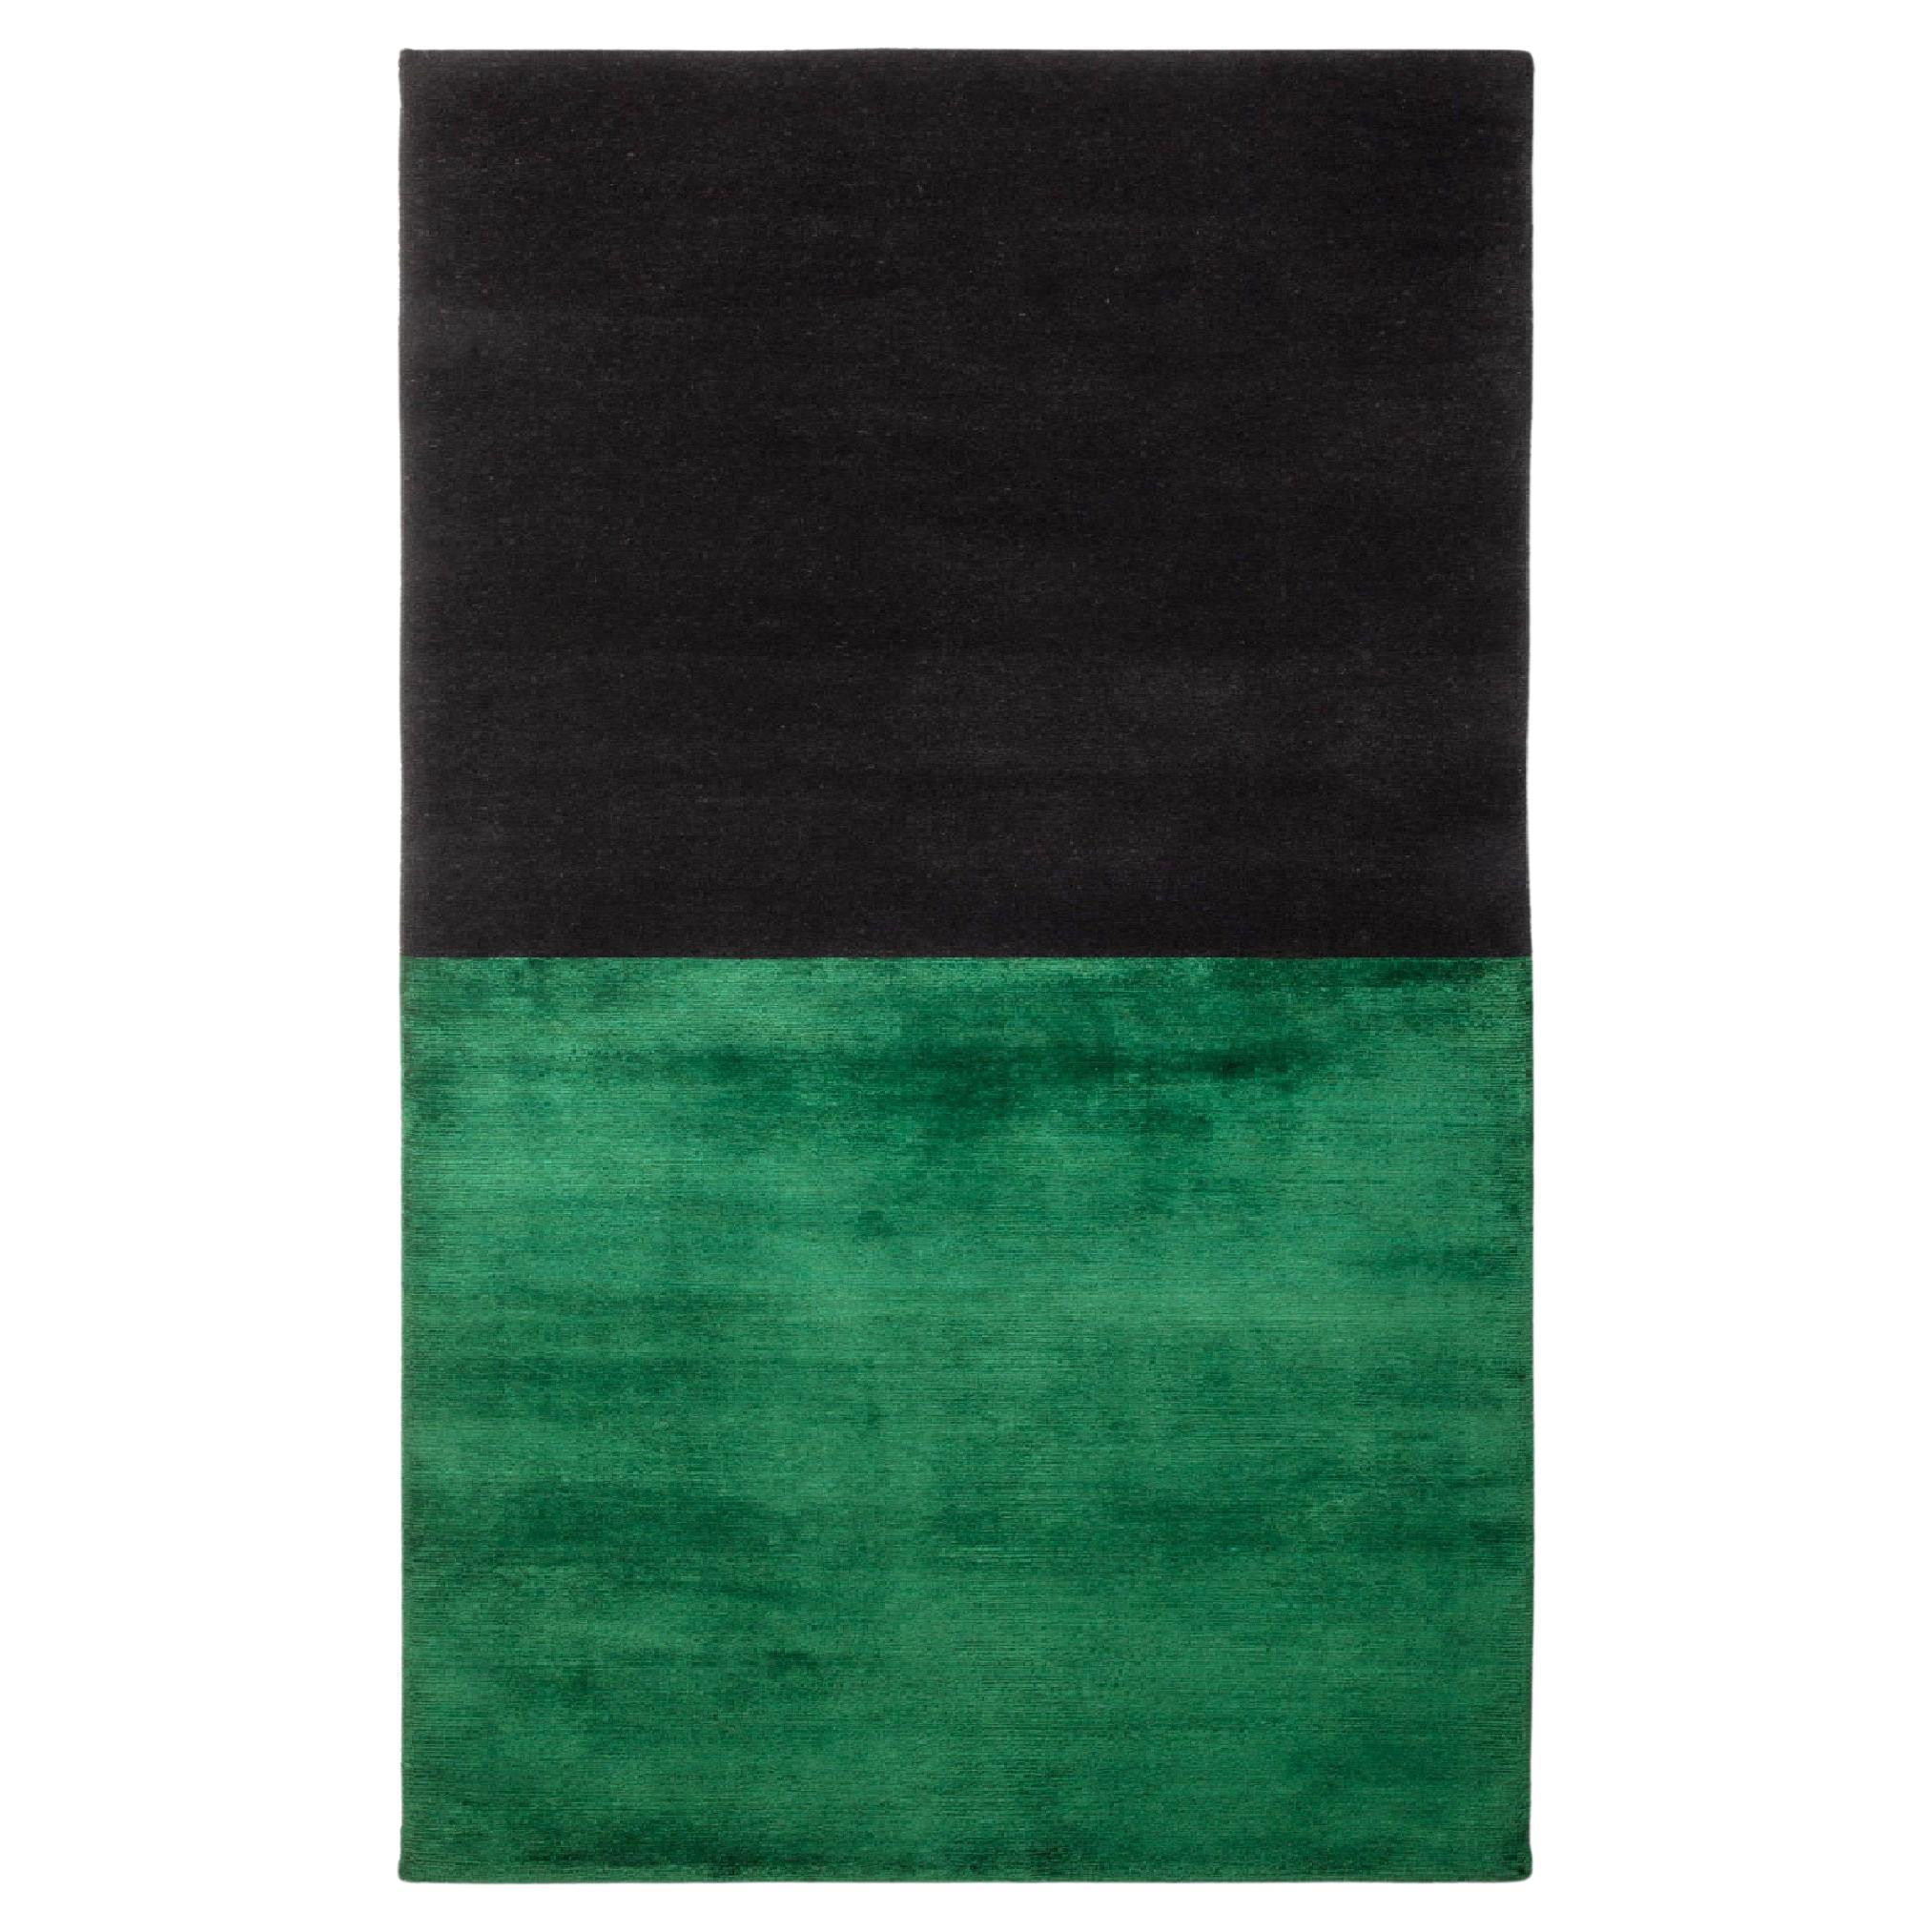 Black/Green Handwoven Tapestry 400 by Calyah